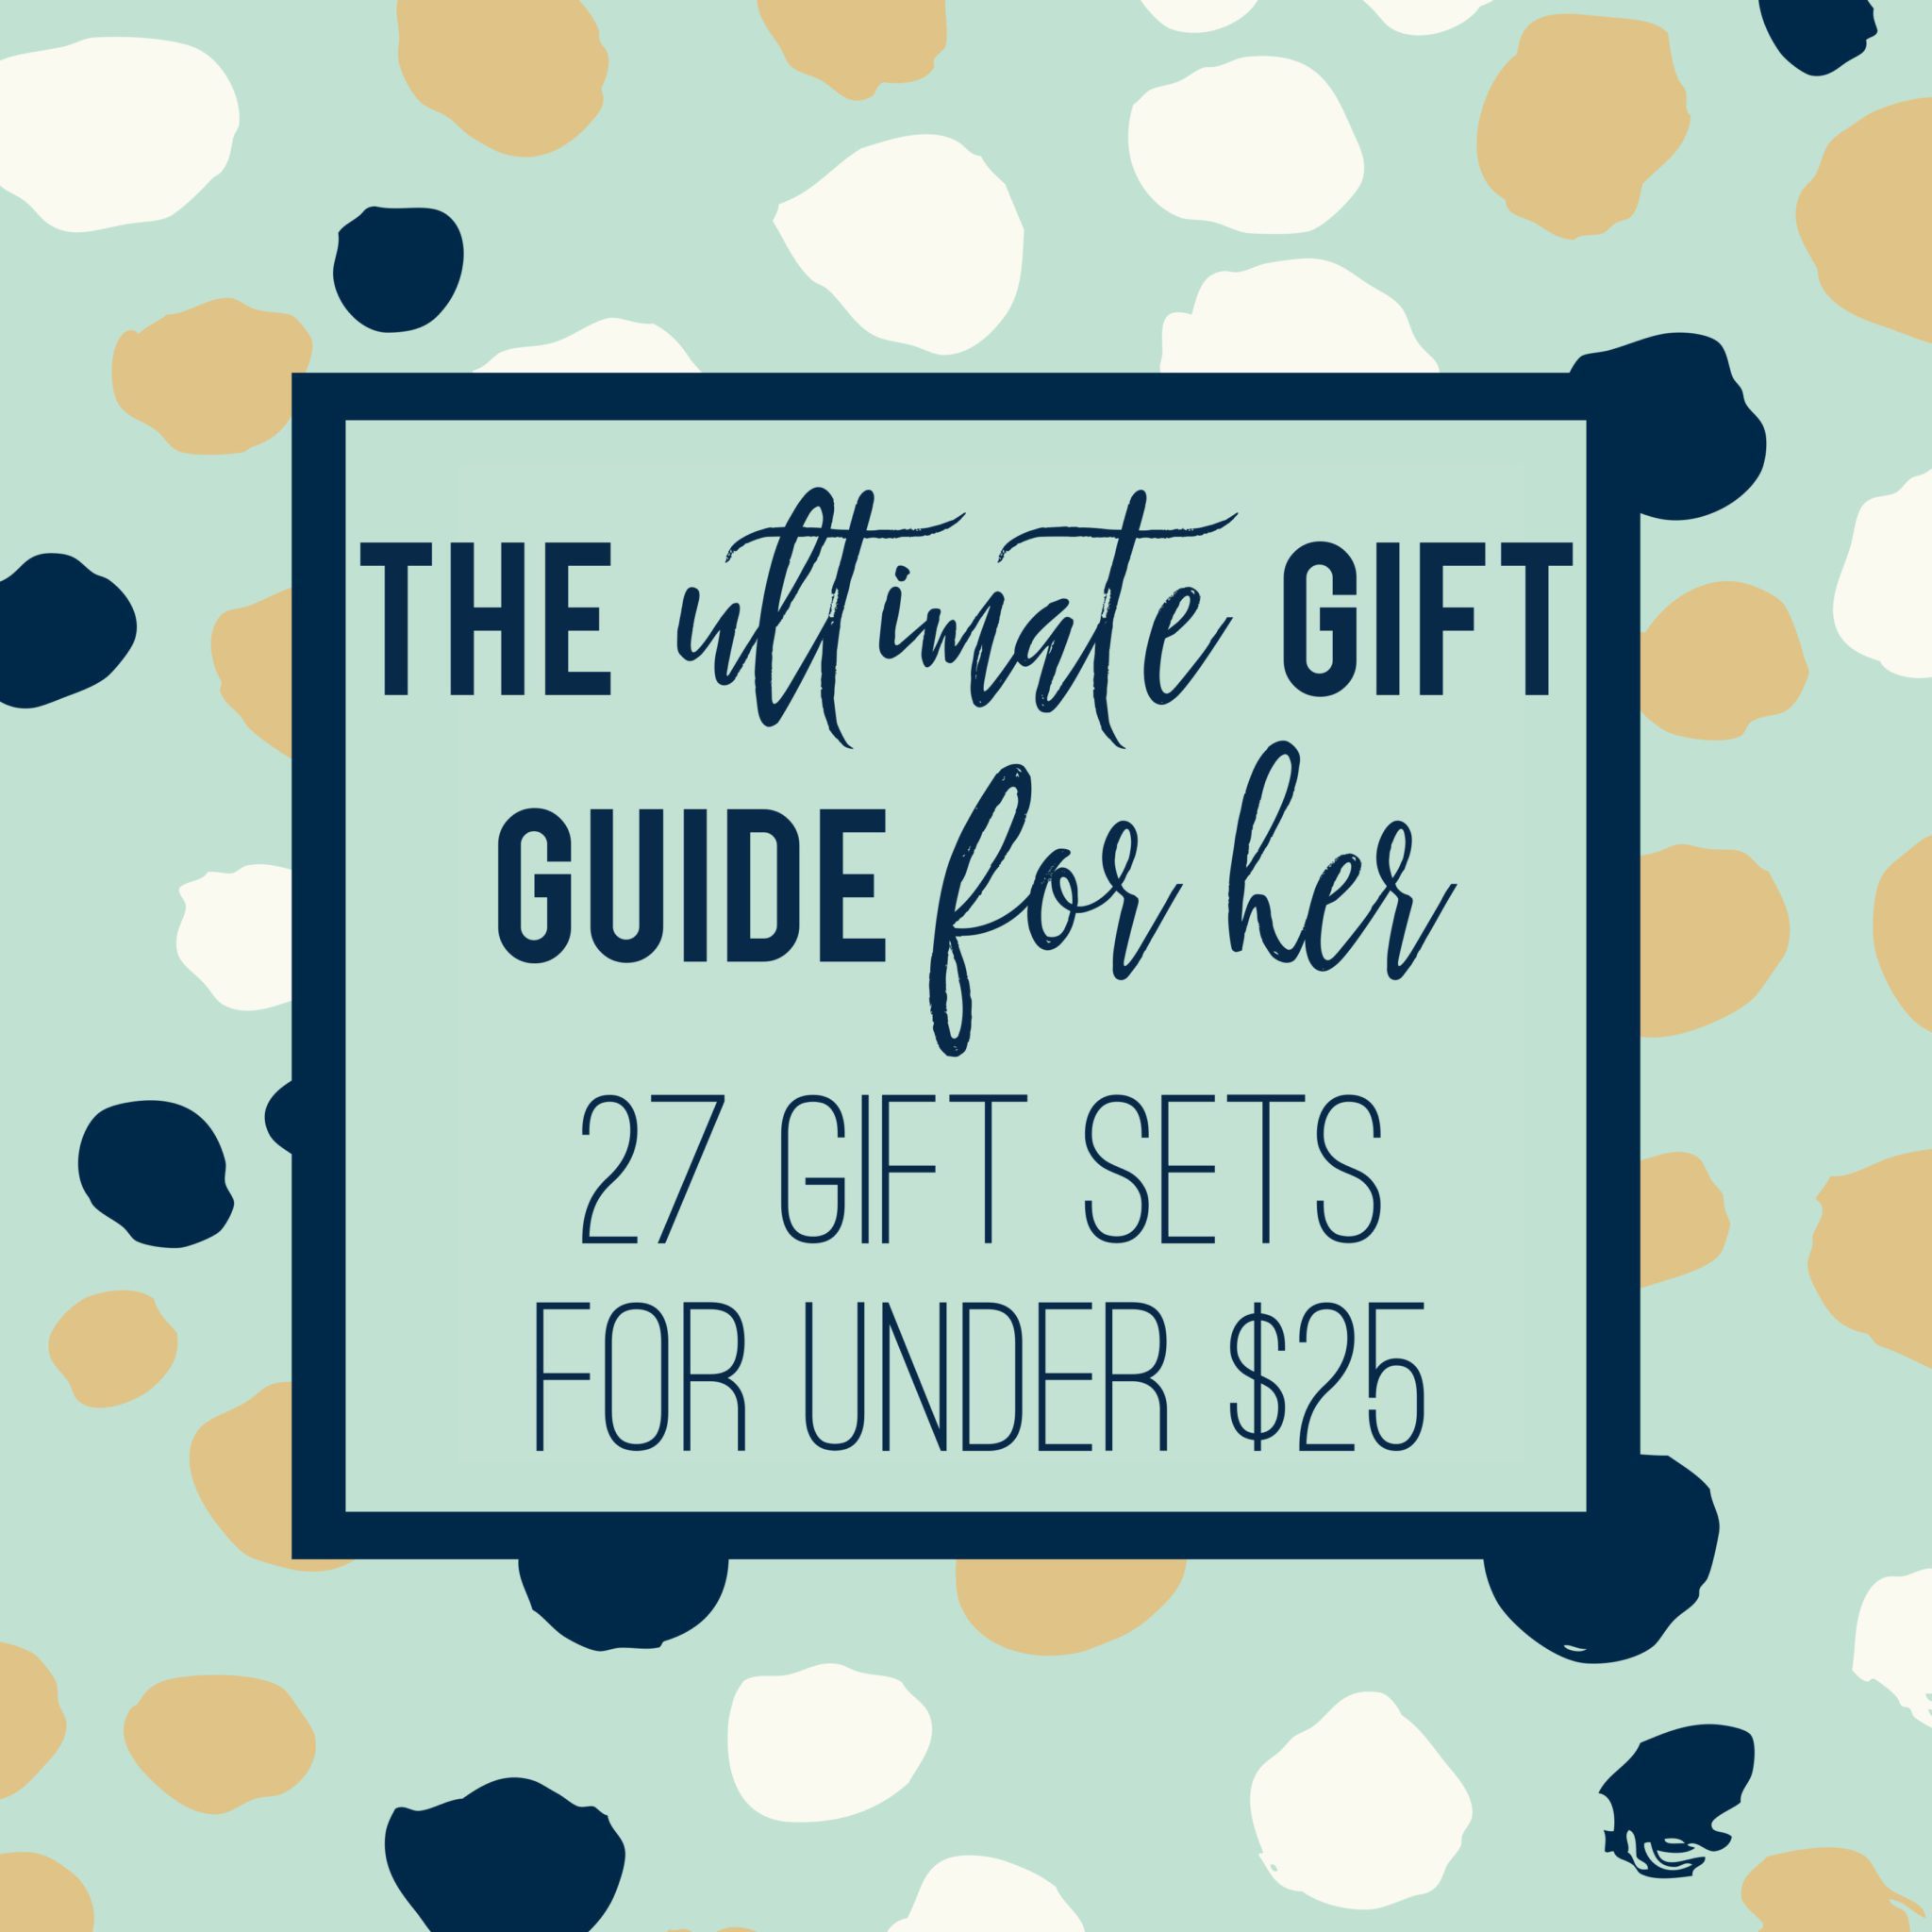 The Ultimate Holiday Gift Guide For Her: 27 Gift Sets Under $25